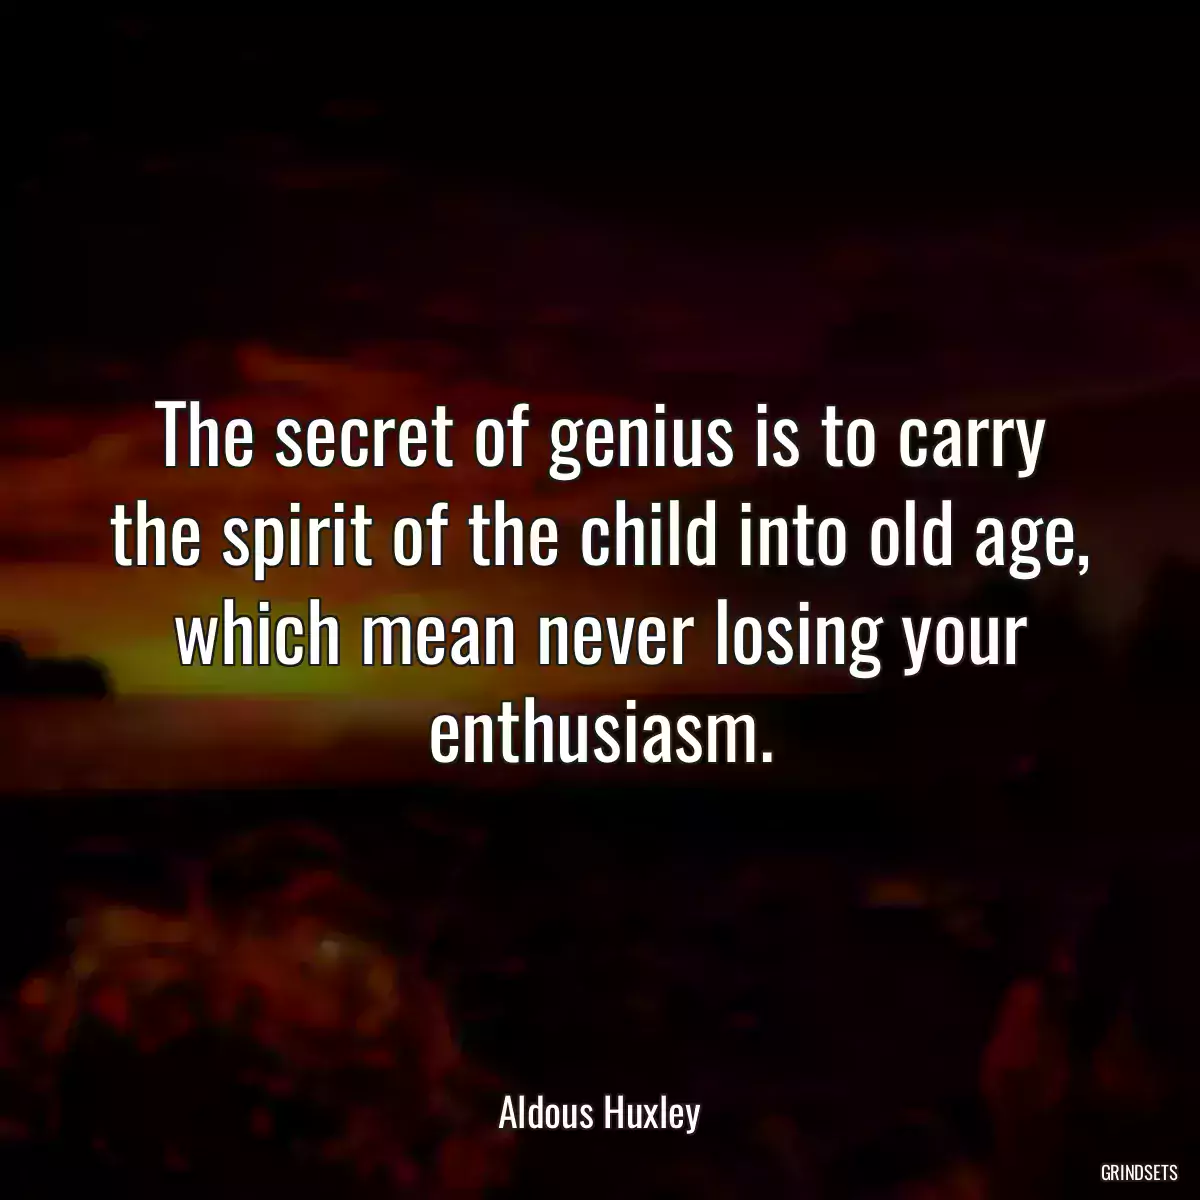 The secret of genius is to carry the spirit of the child into old age, which mean never losing your enthusiasm.